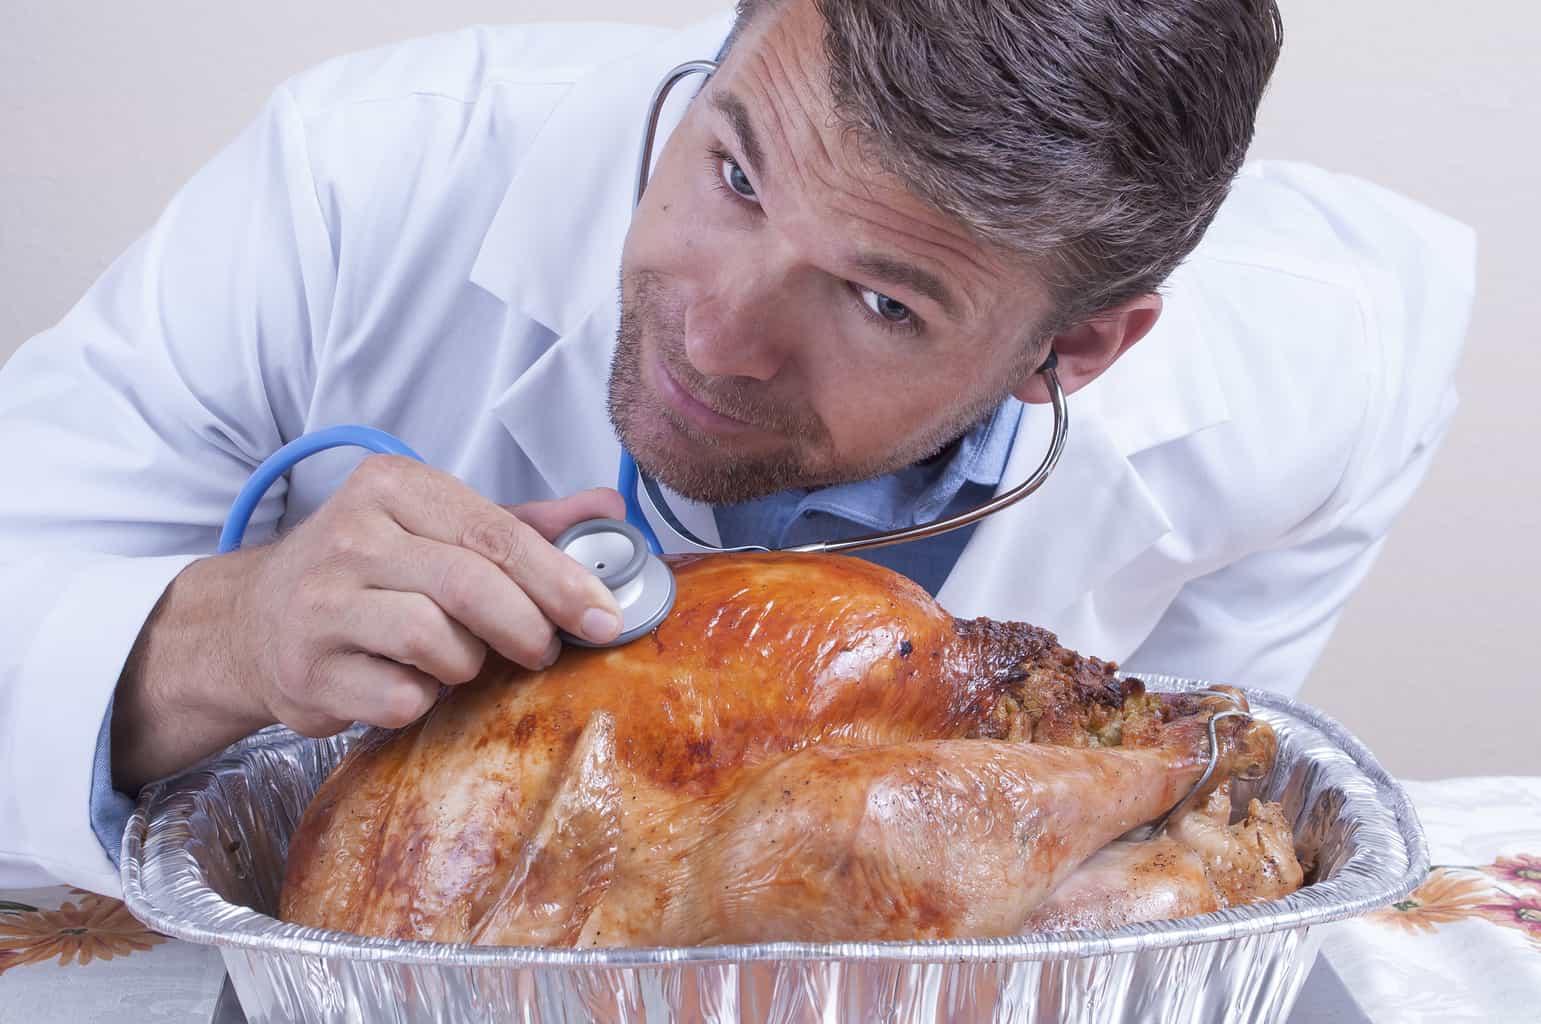 Important Thanksgiving health technique - use it tonight